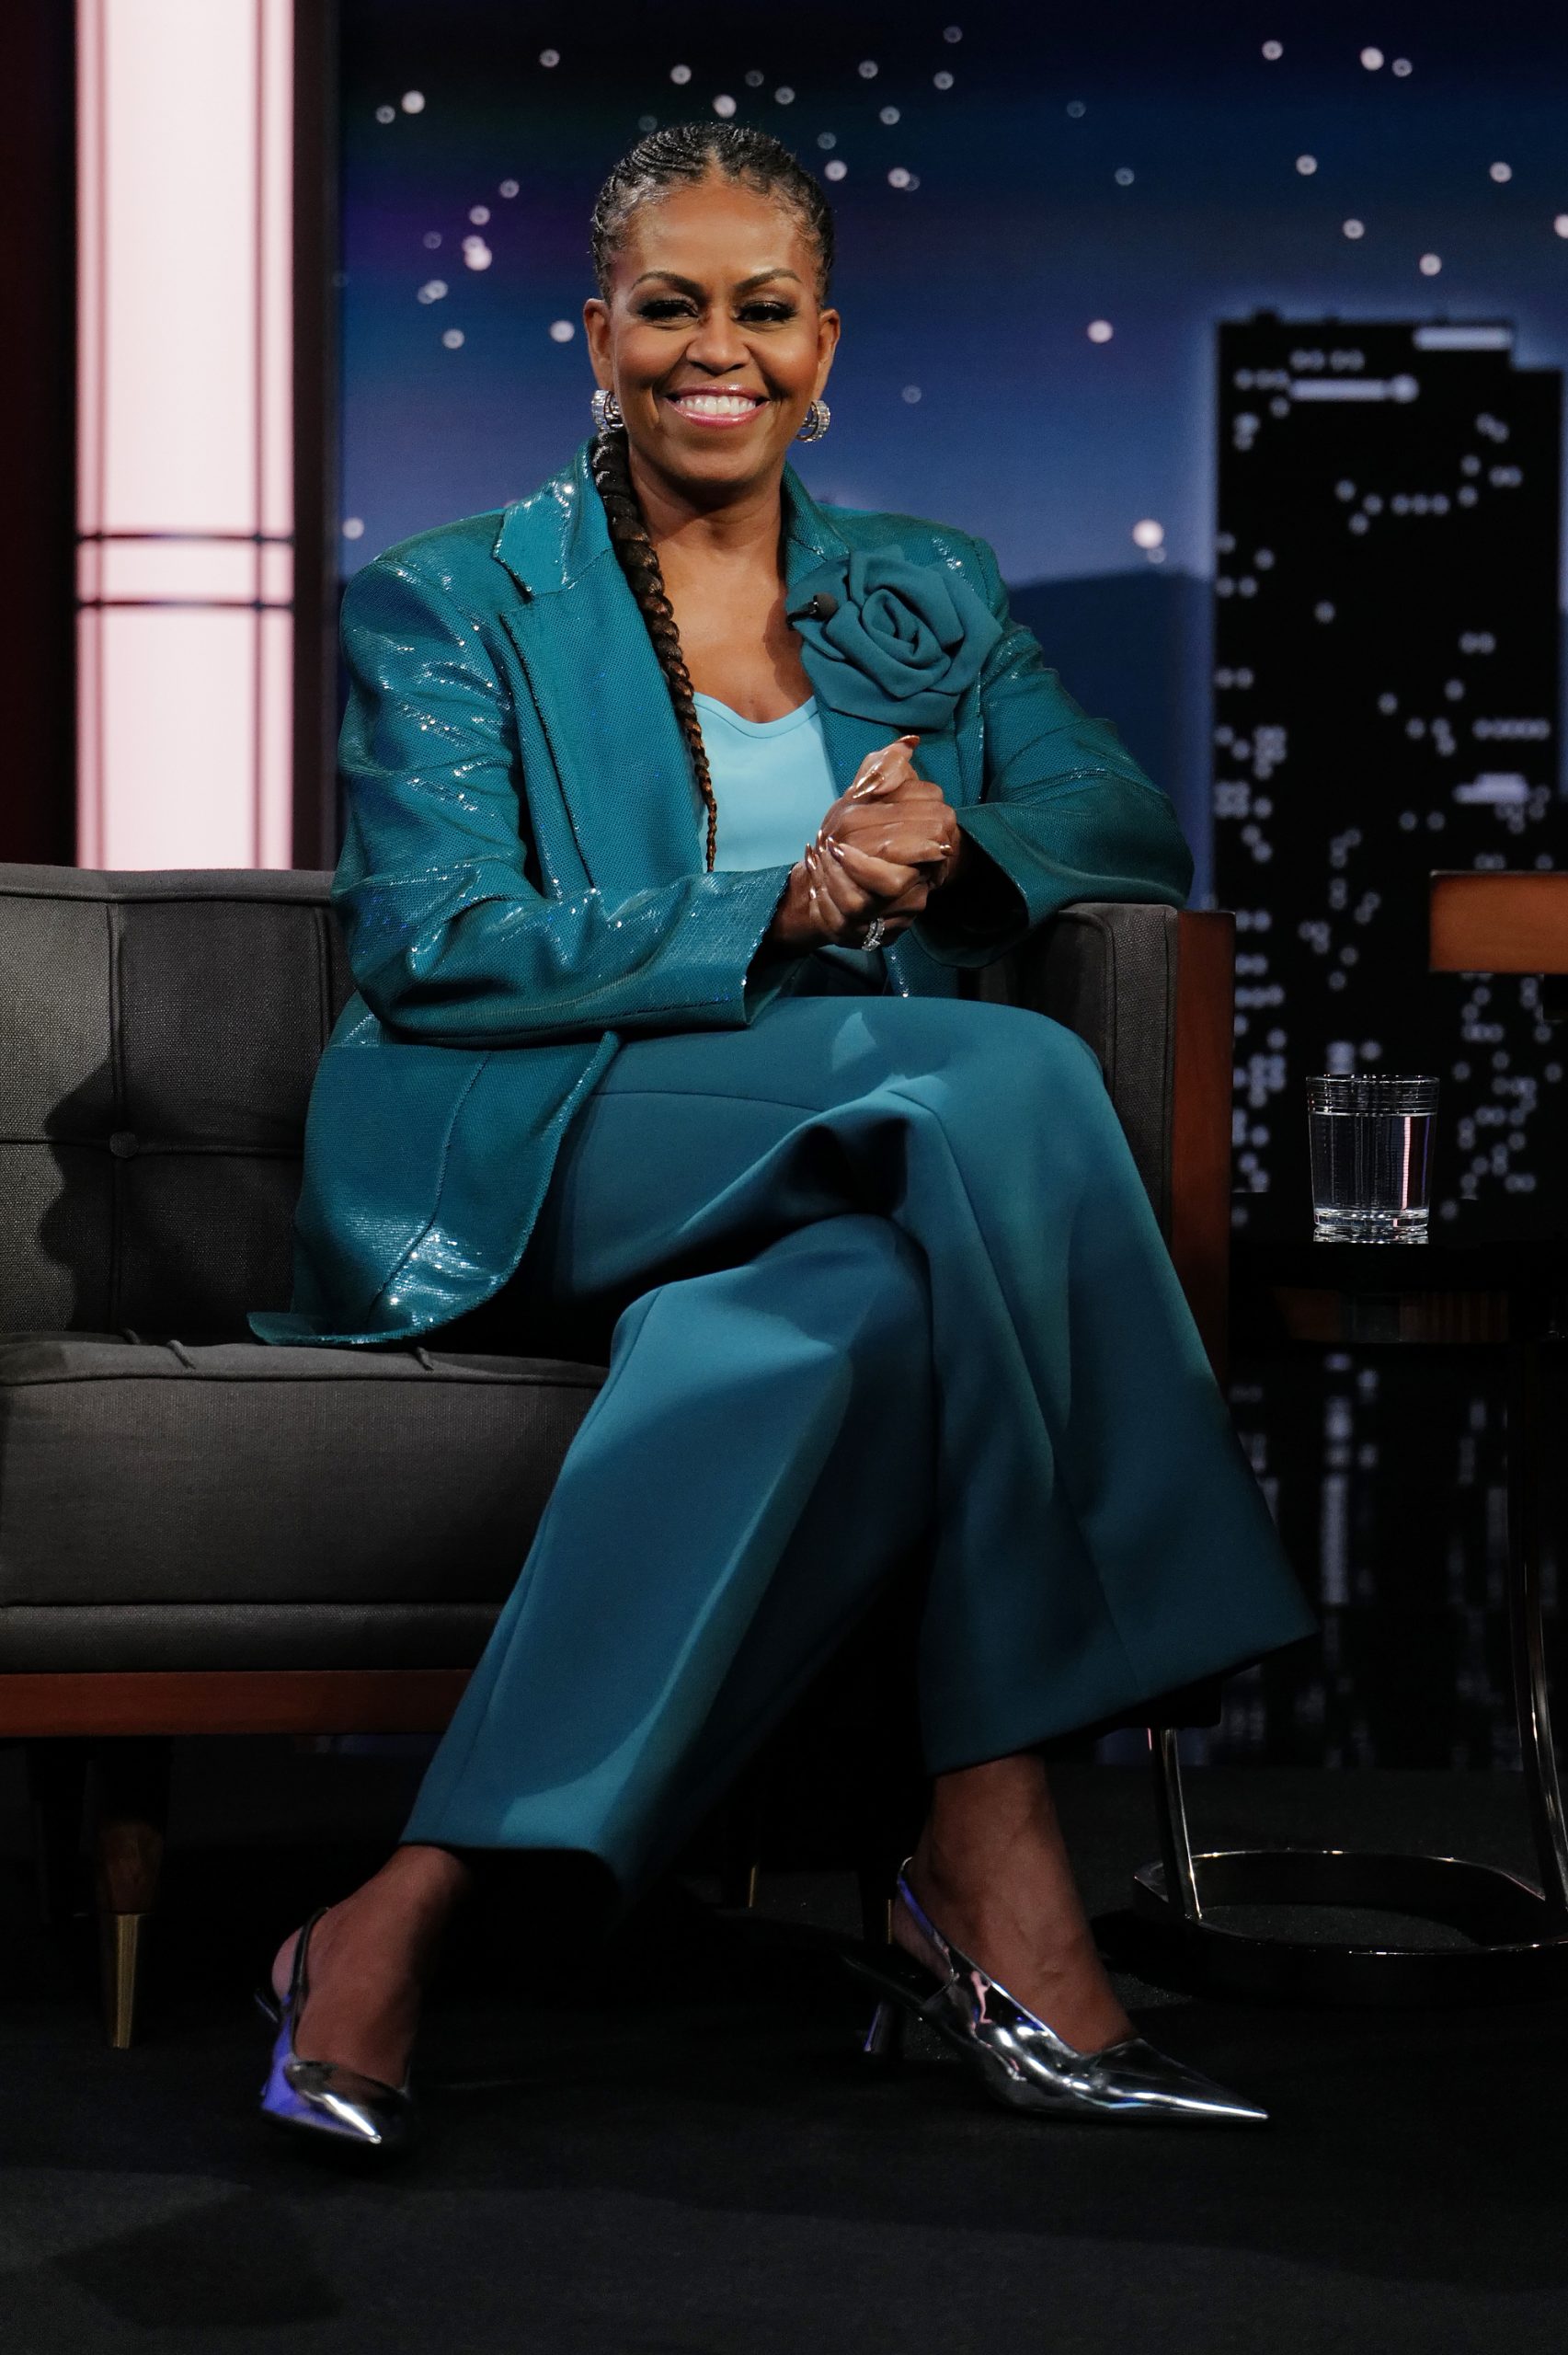 In Case You Missed It: Michelle Obama On ‘Jimmy Kimmel Live’